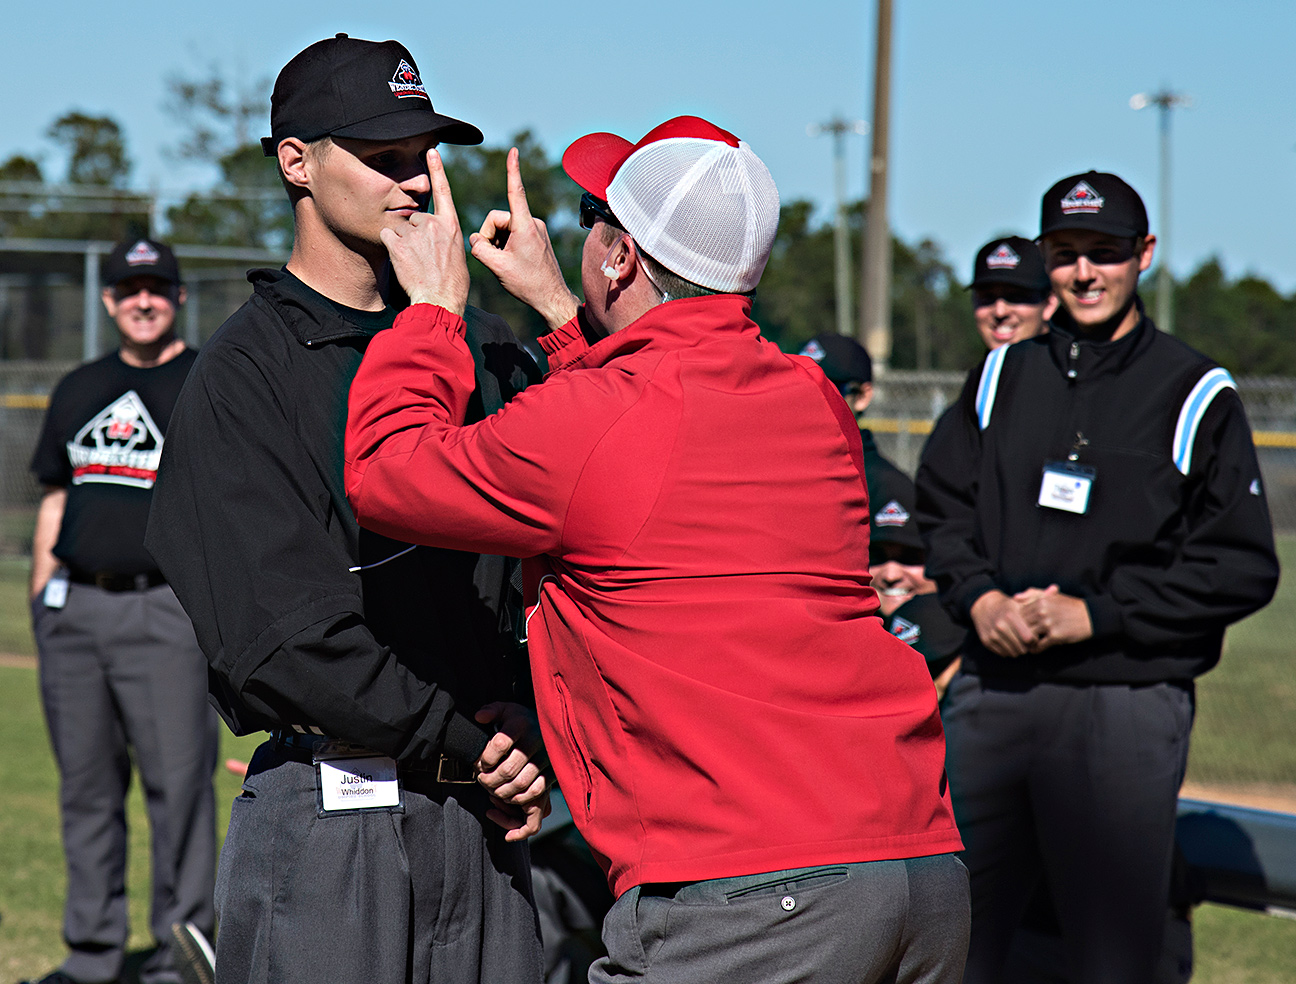 Umpire school is just the beginning of the journey for students